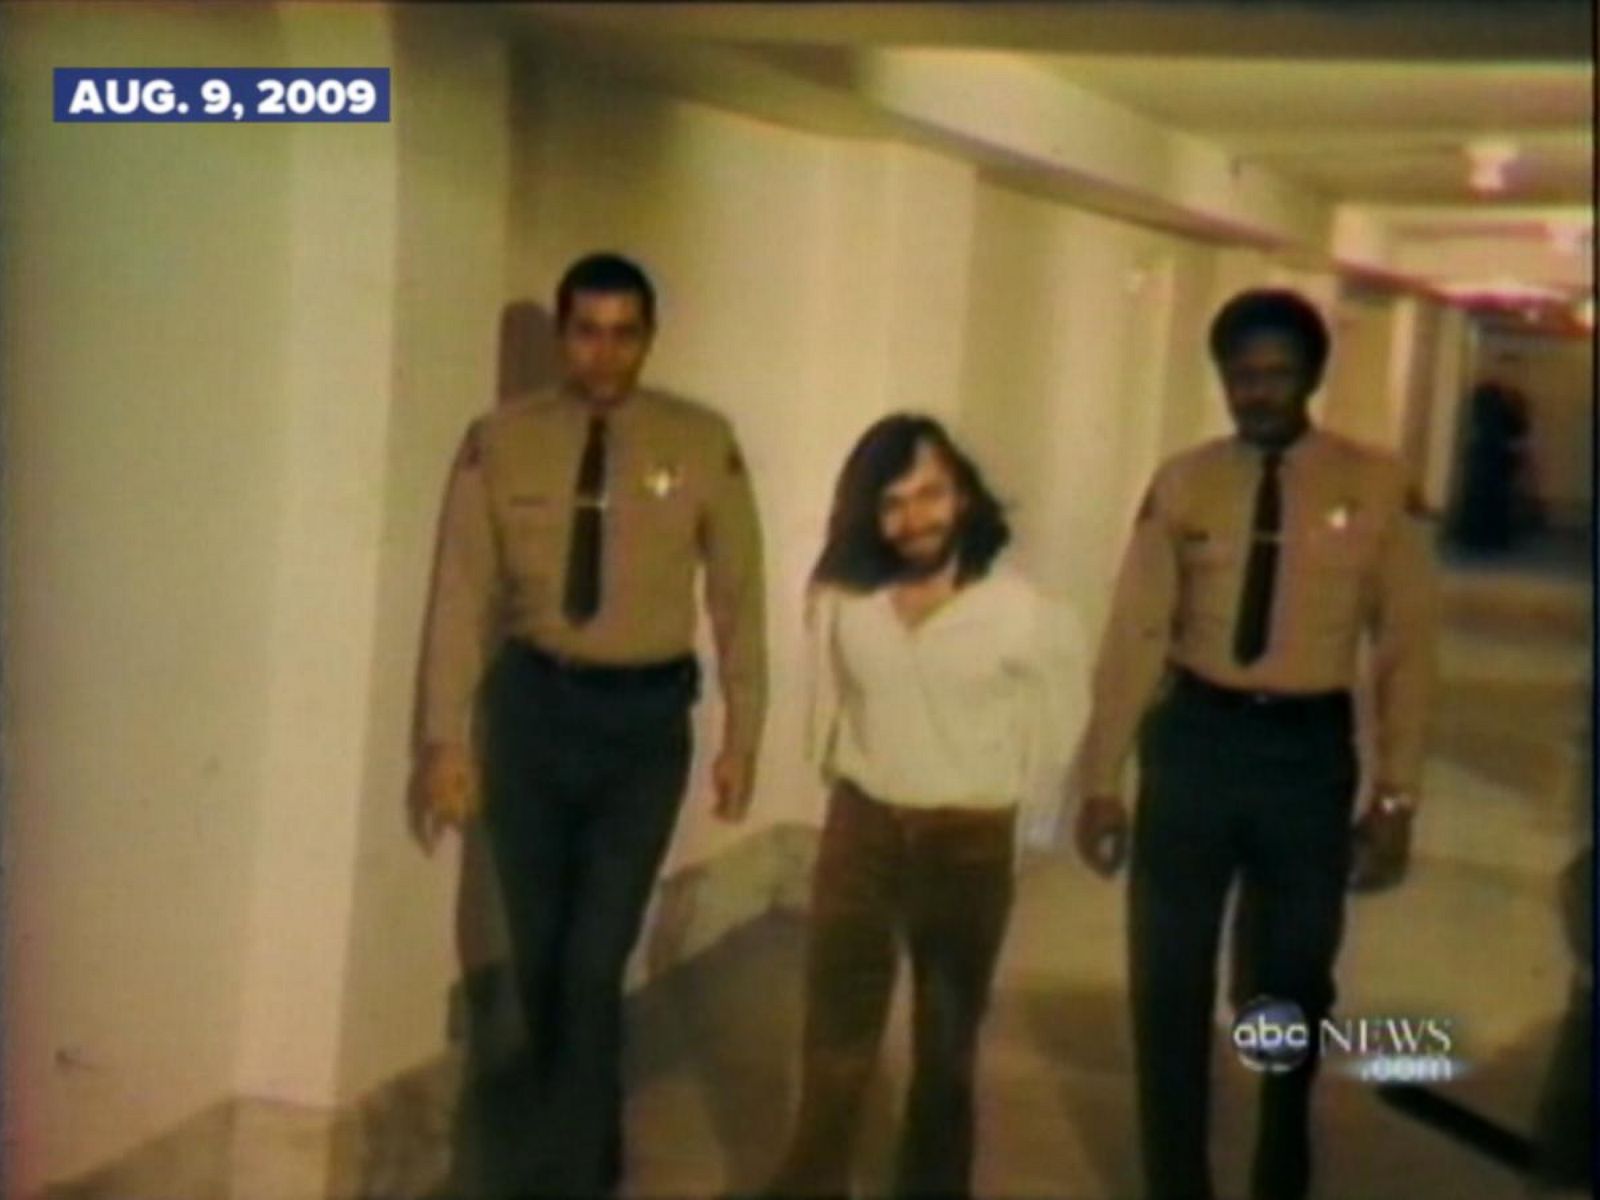 ARCHIVAL VIDEO: Manson murders, 40 years later